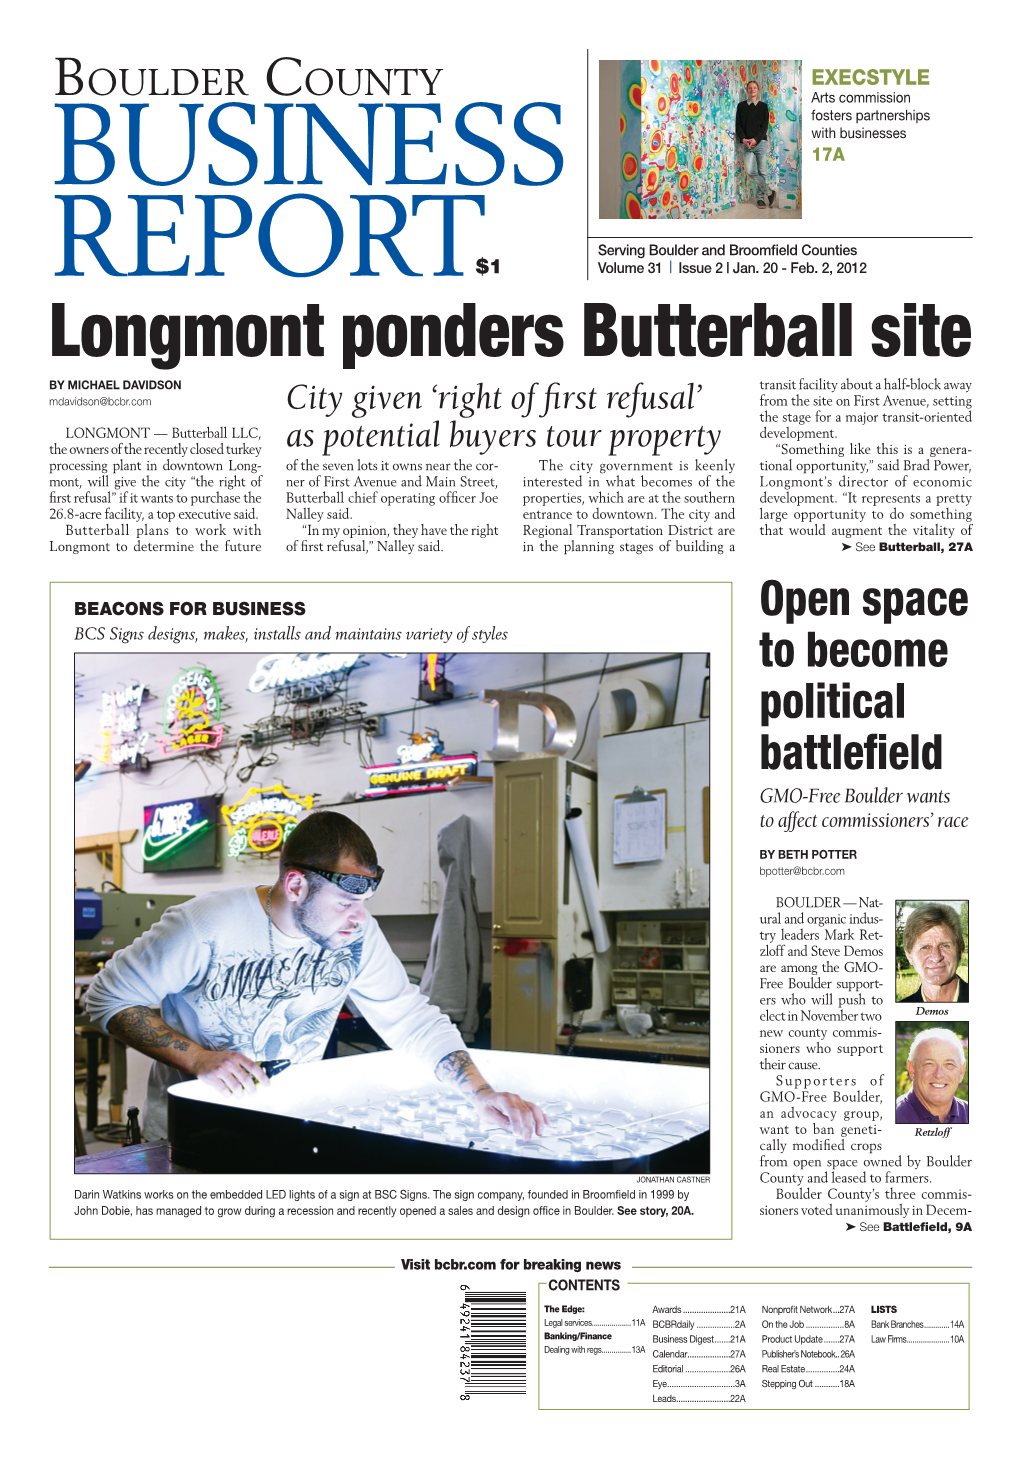 Longmont Ponders Butterball Site